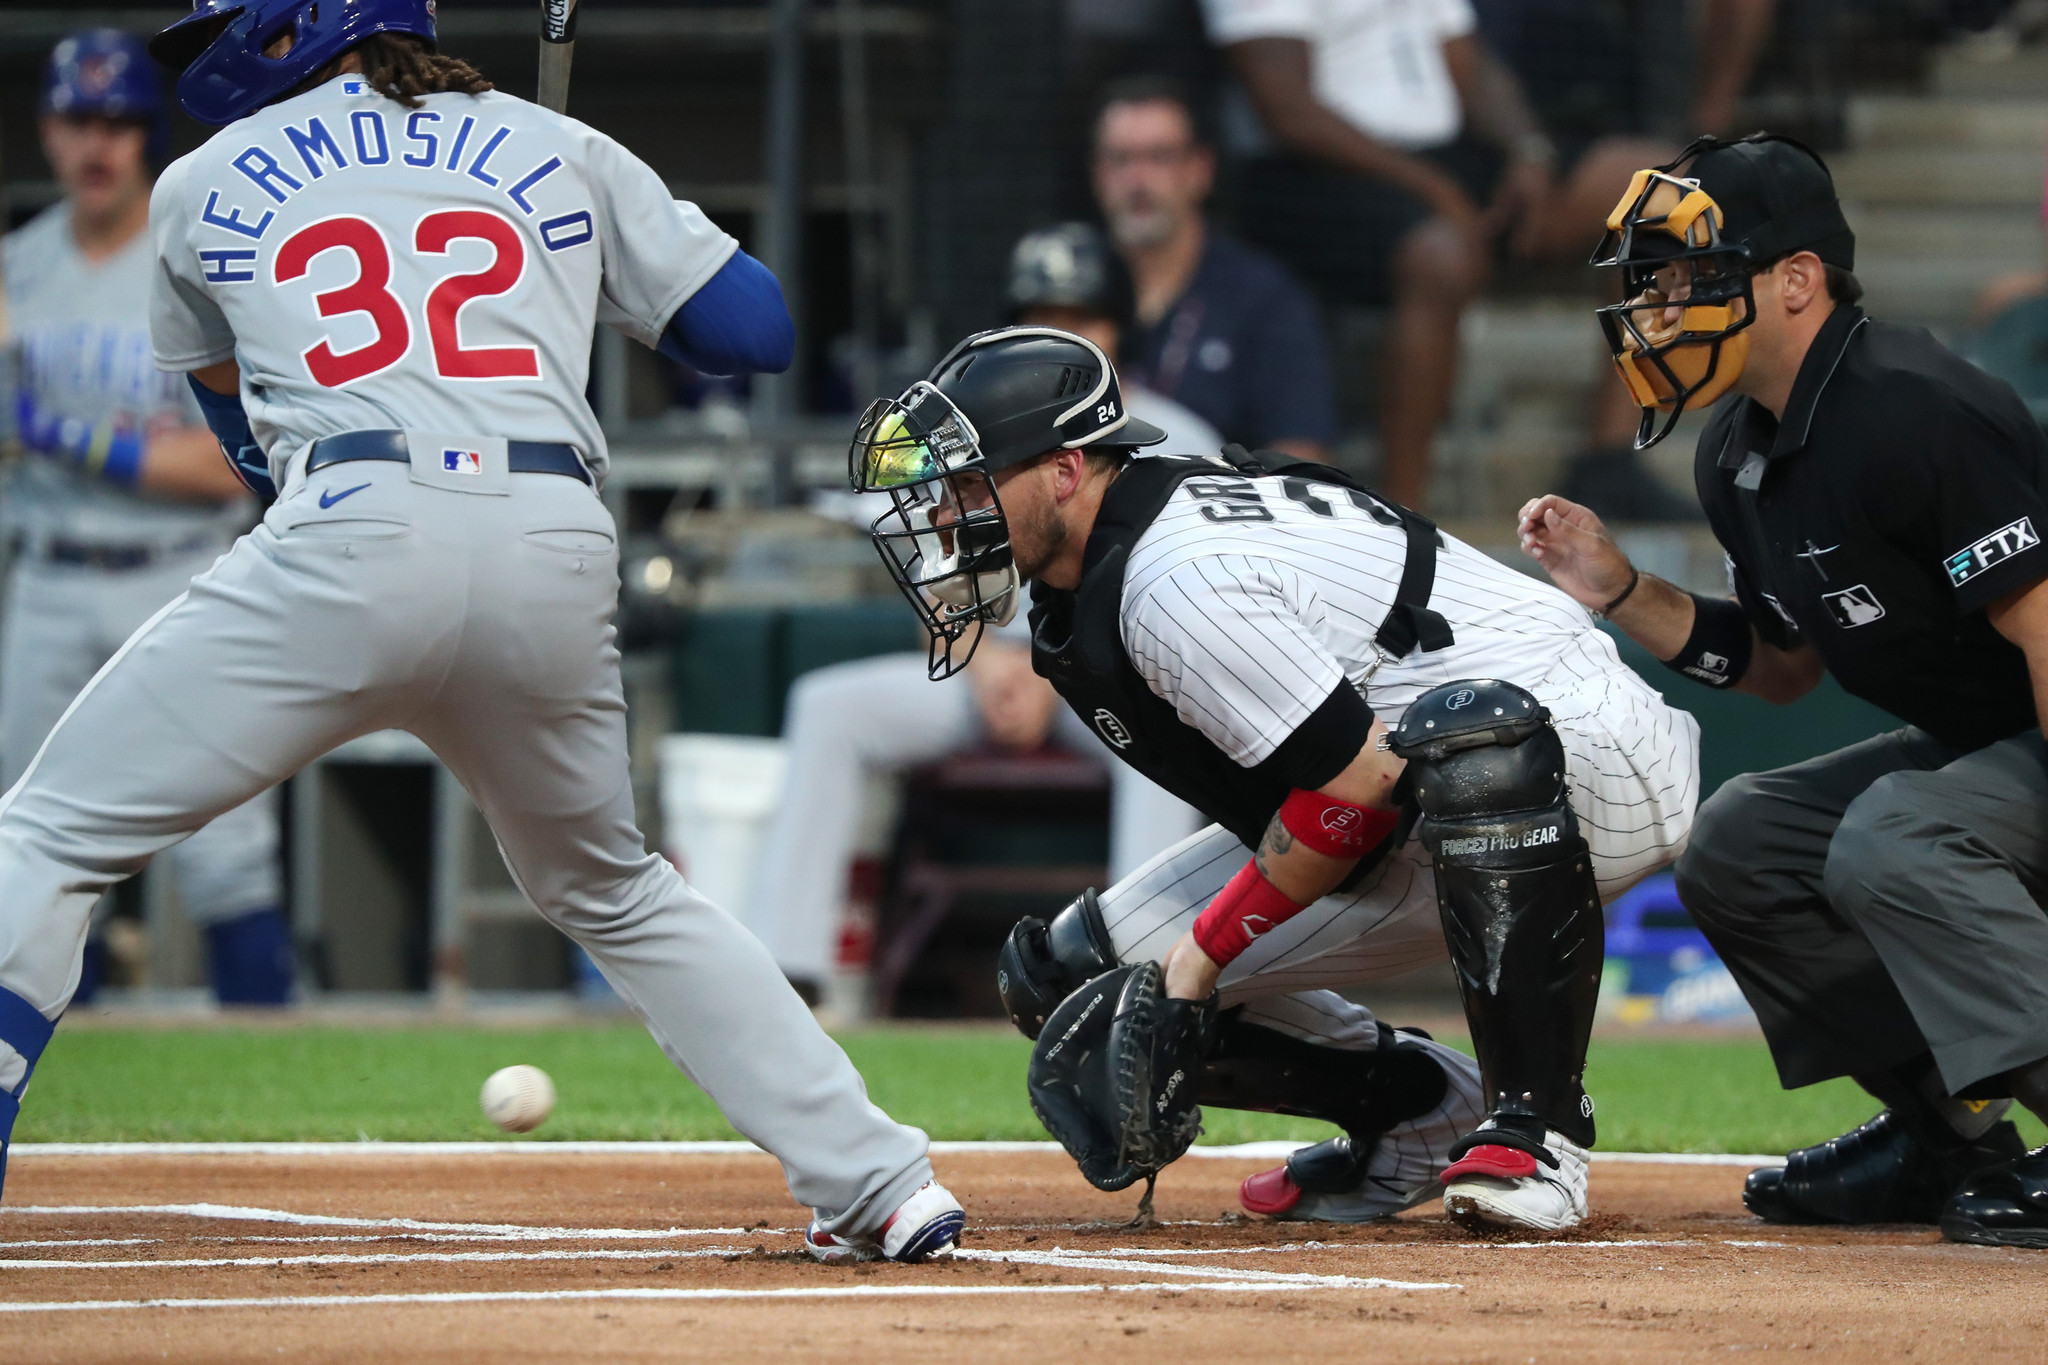 Yasmani Grandal is called out at the plate after review : r/baseball